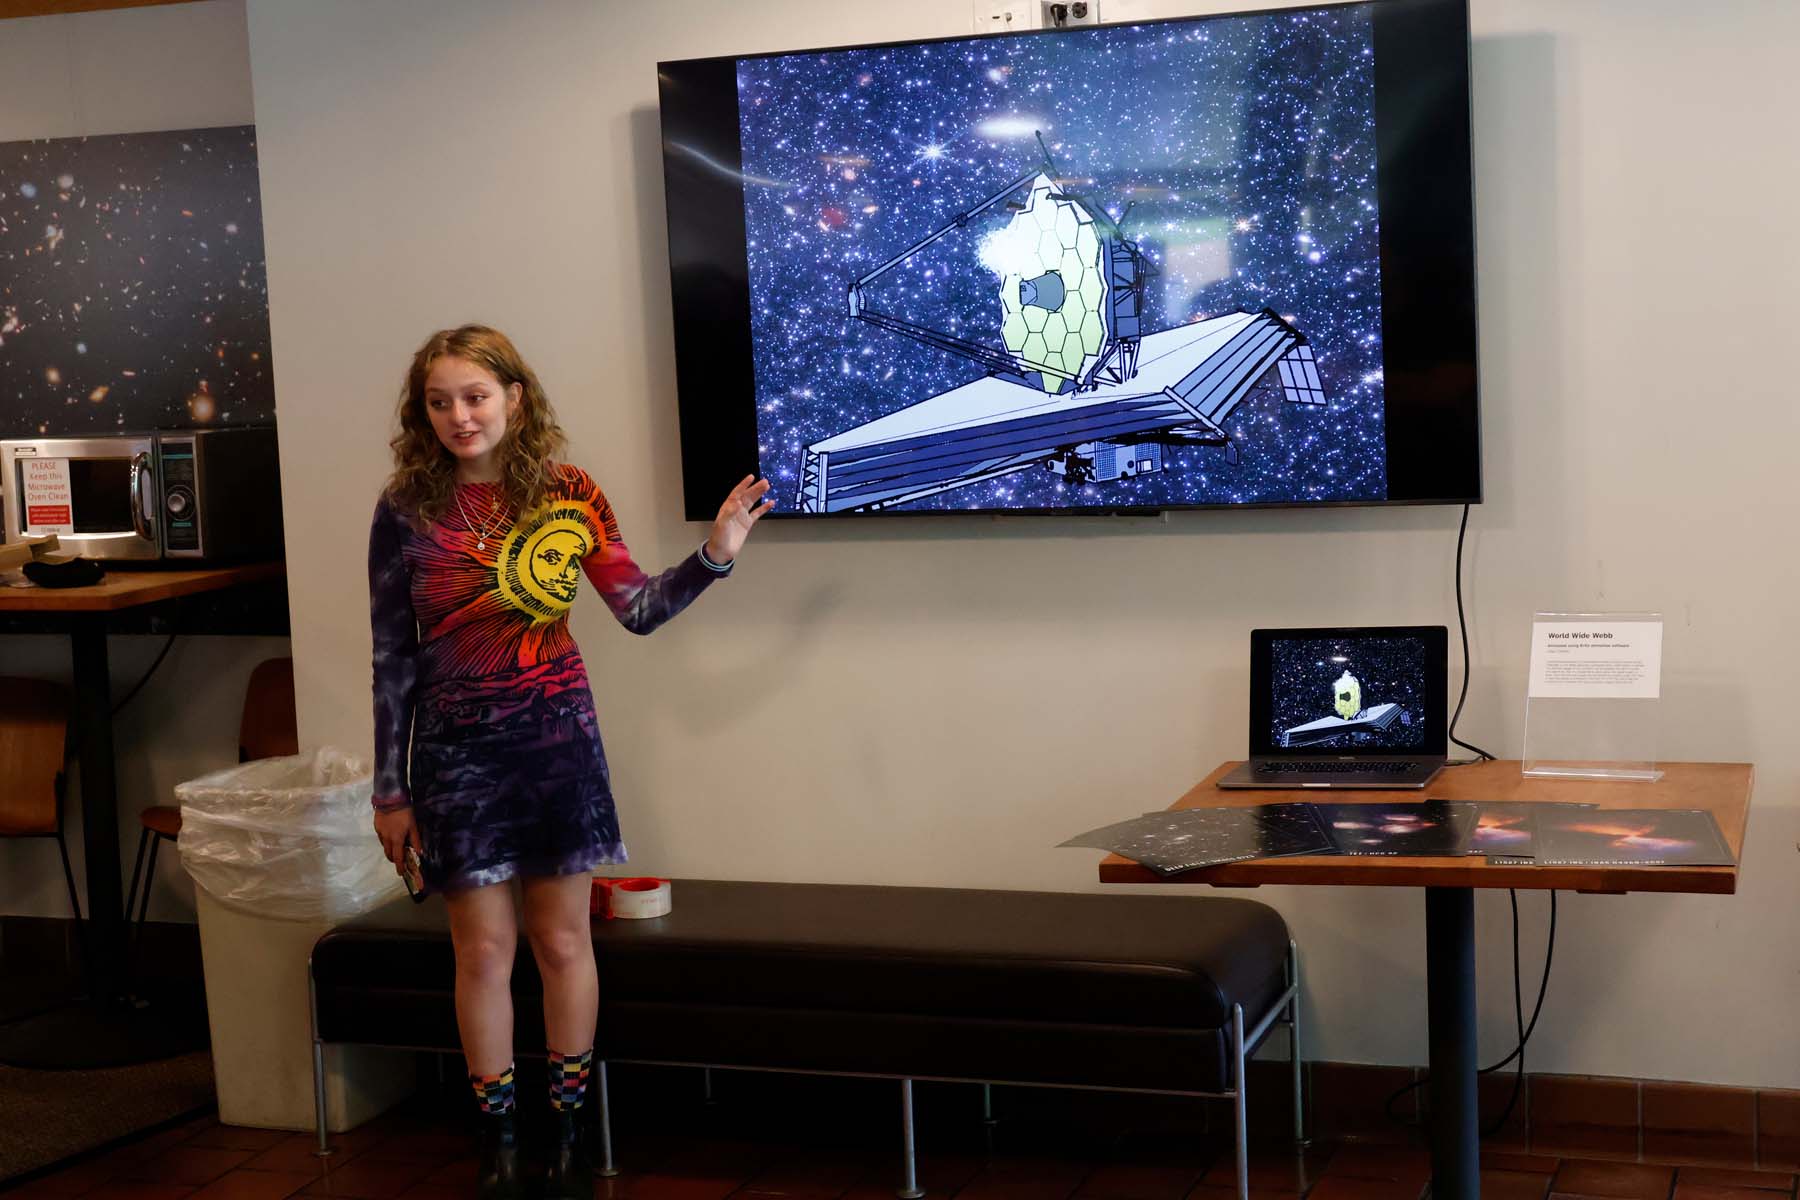 A student wearing a dress with the sun printed on it motions towards a large television screen playing her animation of the James Webb Space Telescope.